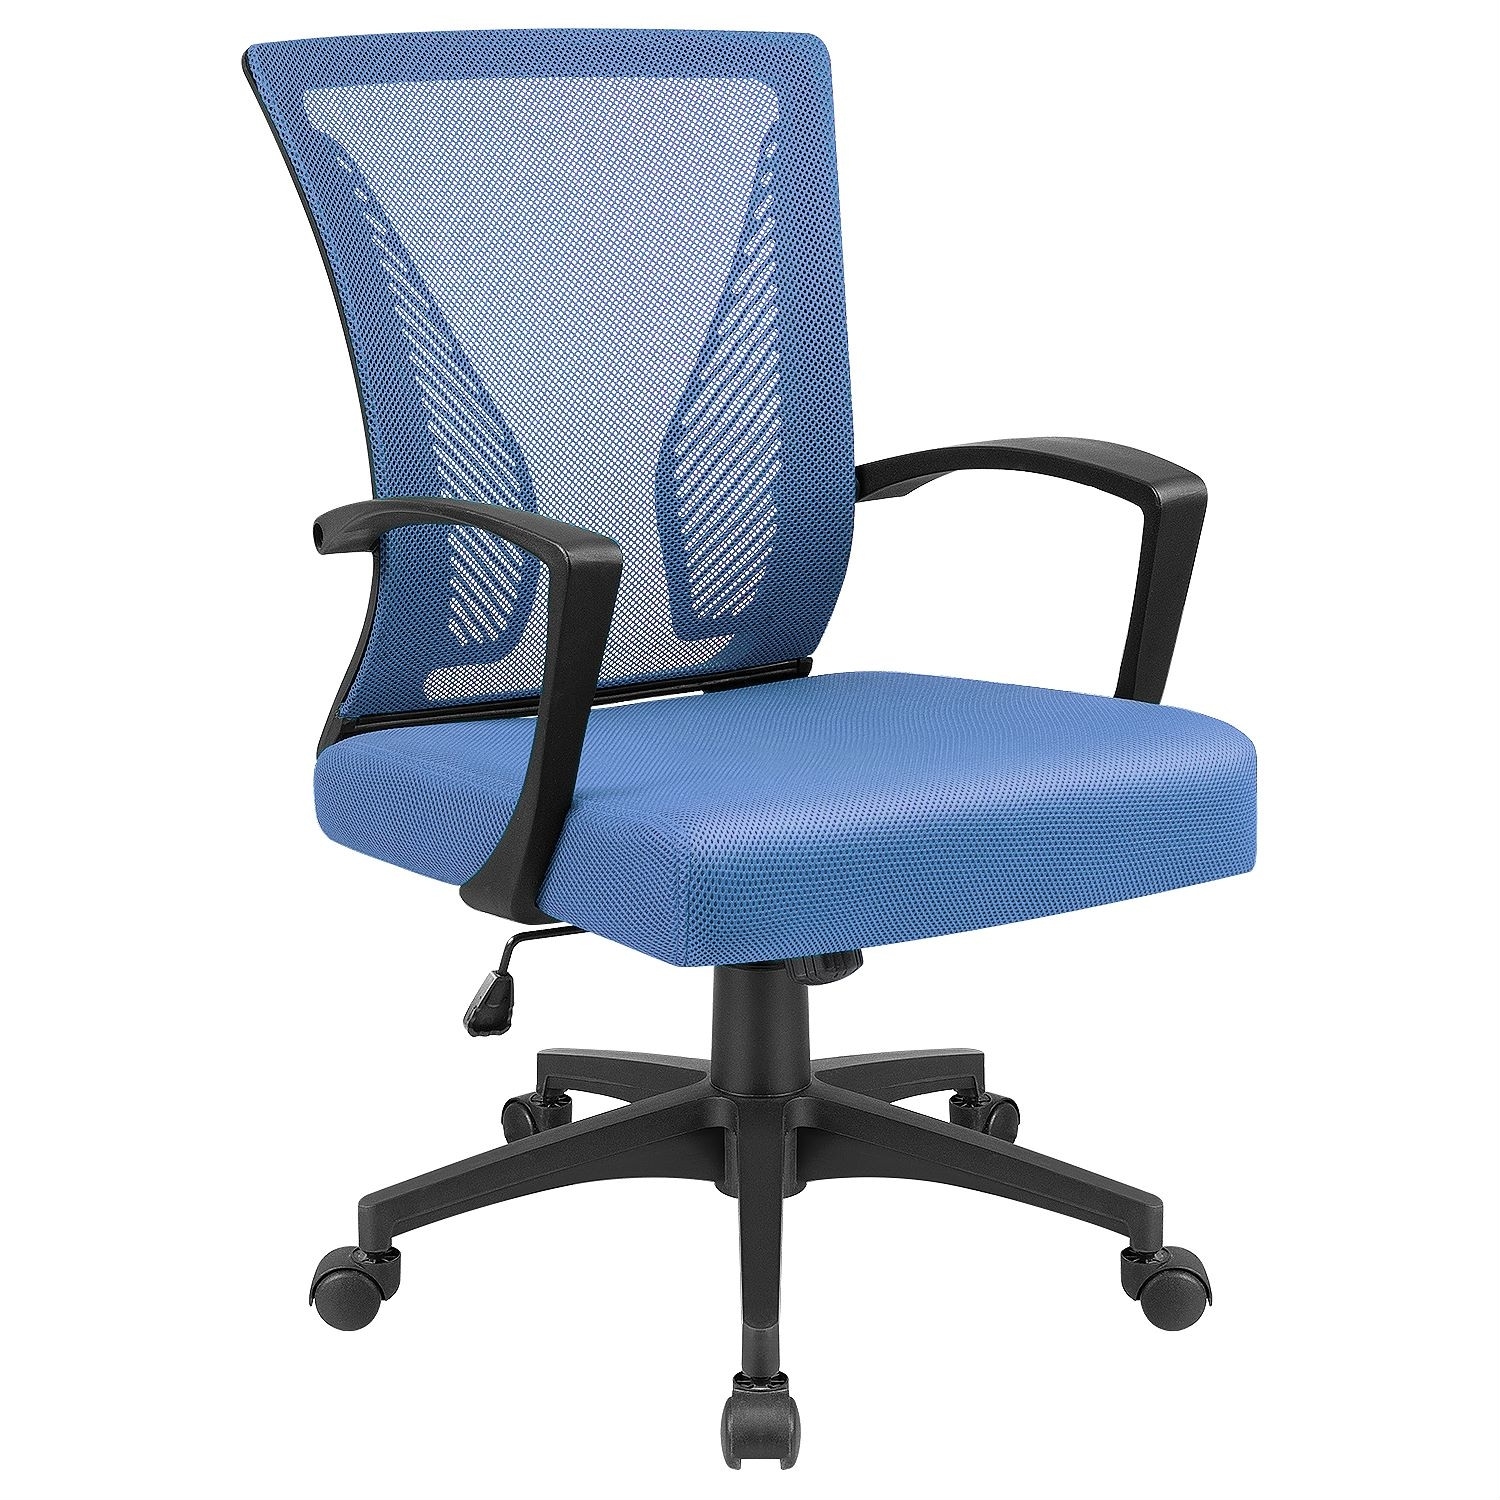 Homall Office Chair Ergonomic Desk Chair with Lumbar Support - On Sale -  Bed Bath & Beyond - 33045076